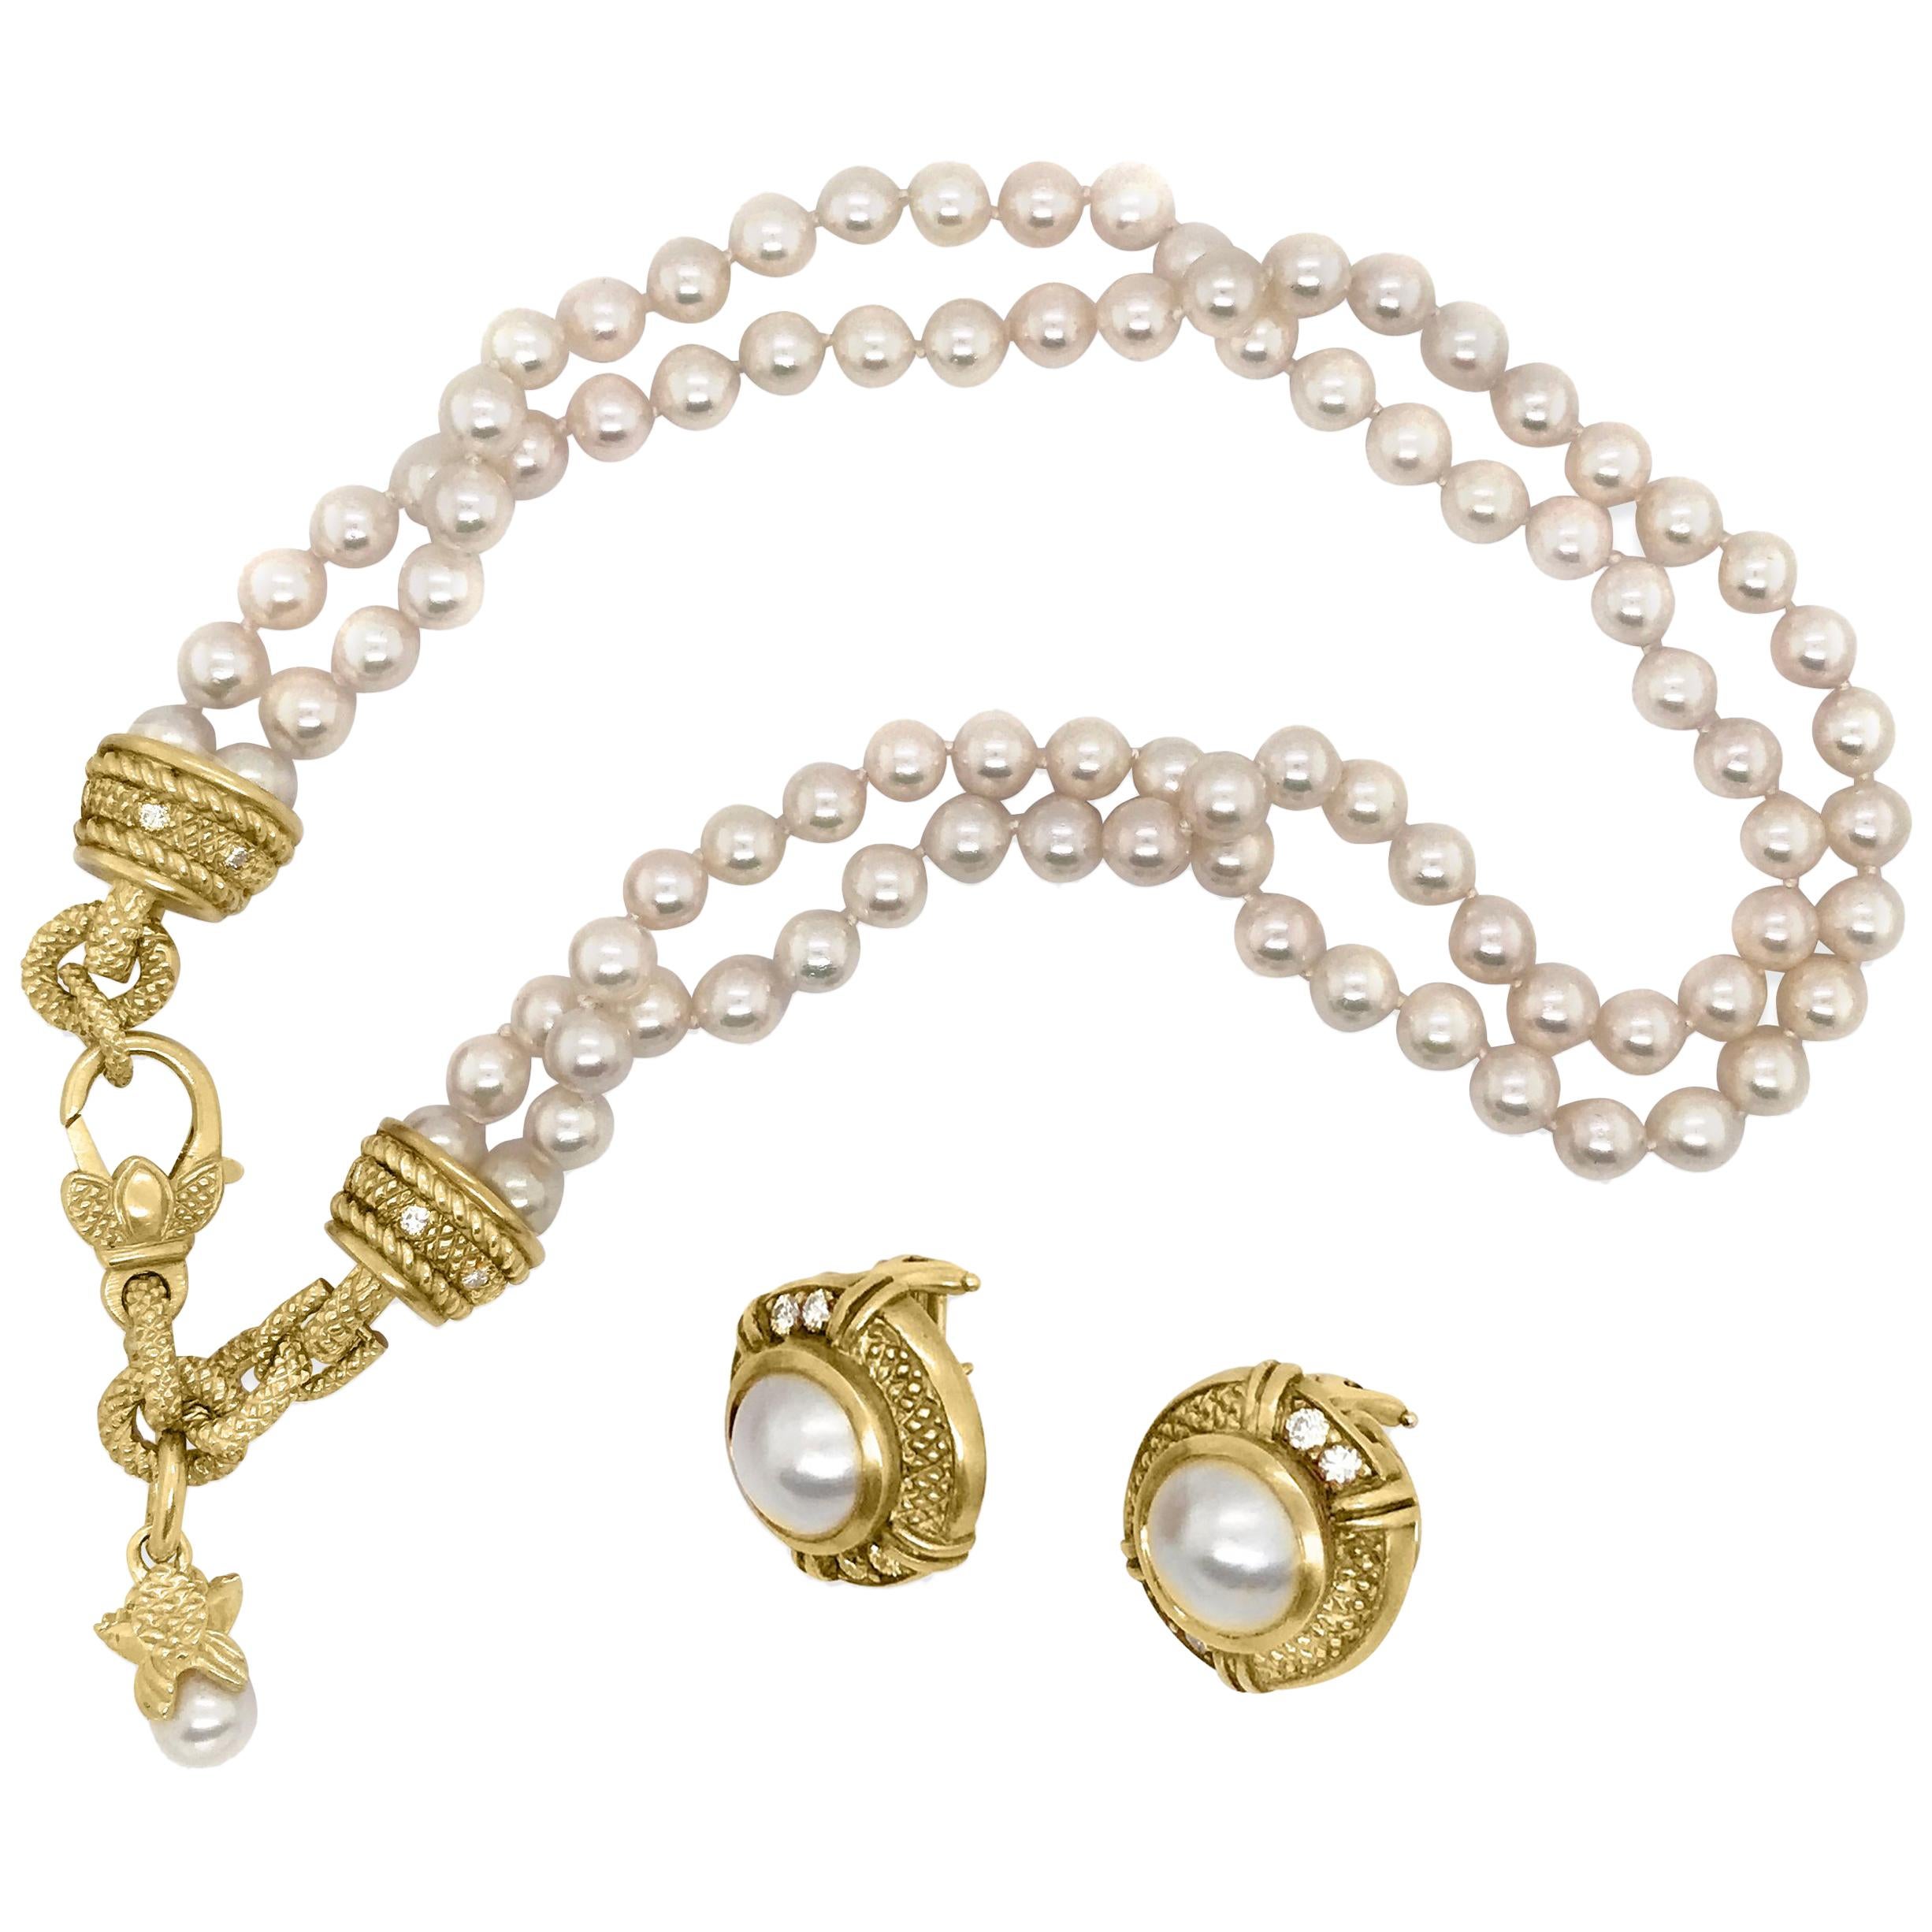 Judith Ripka, Double Strand Pearl 18 Karat Gold Necklace and Earrings Set